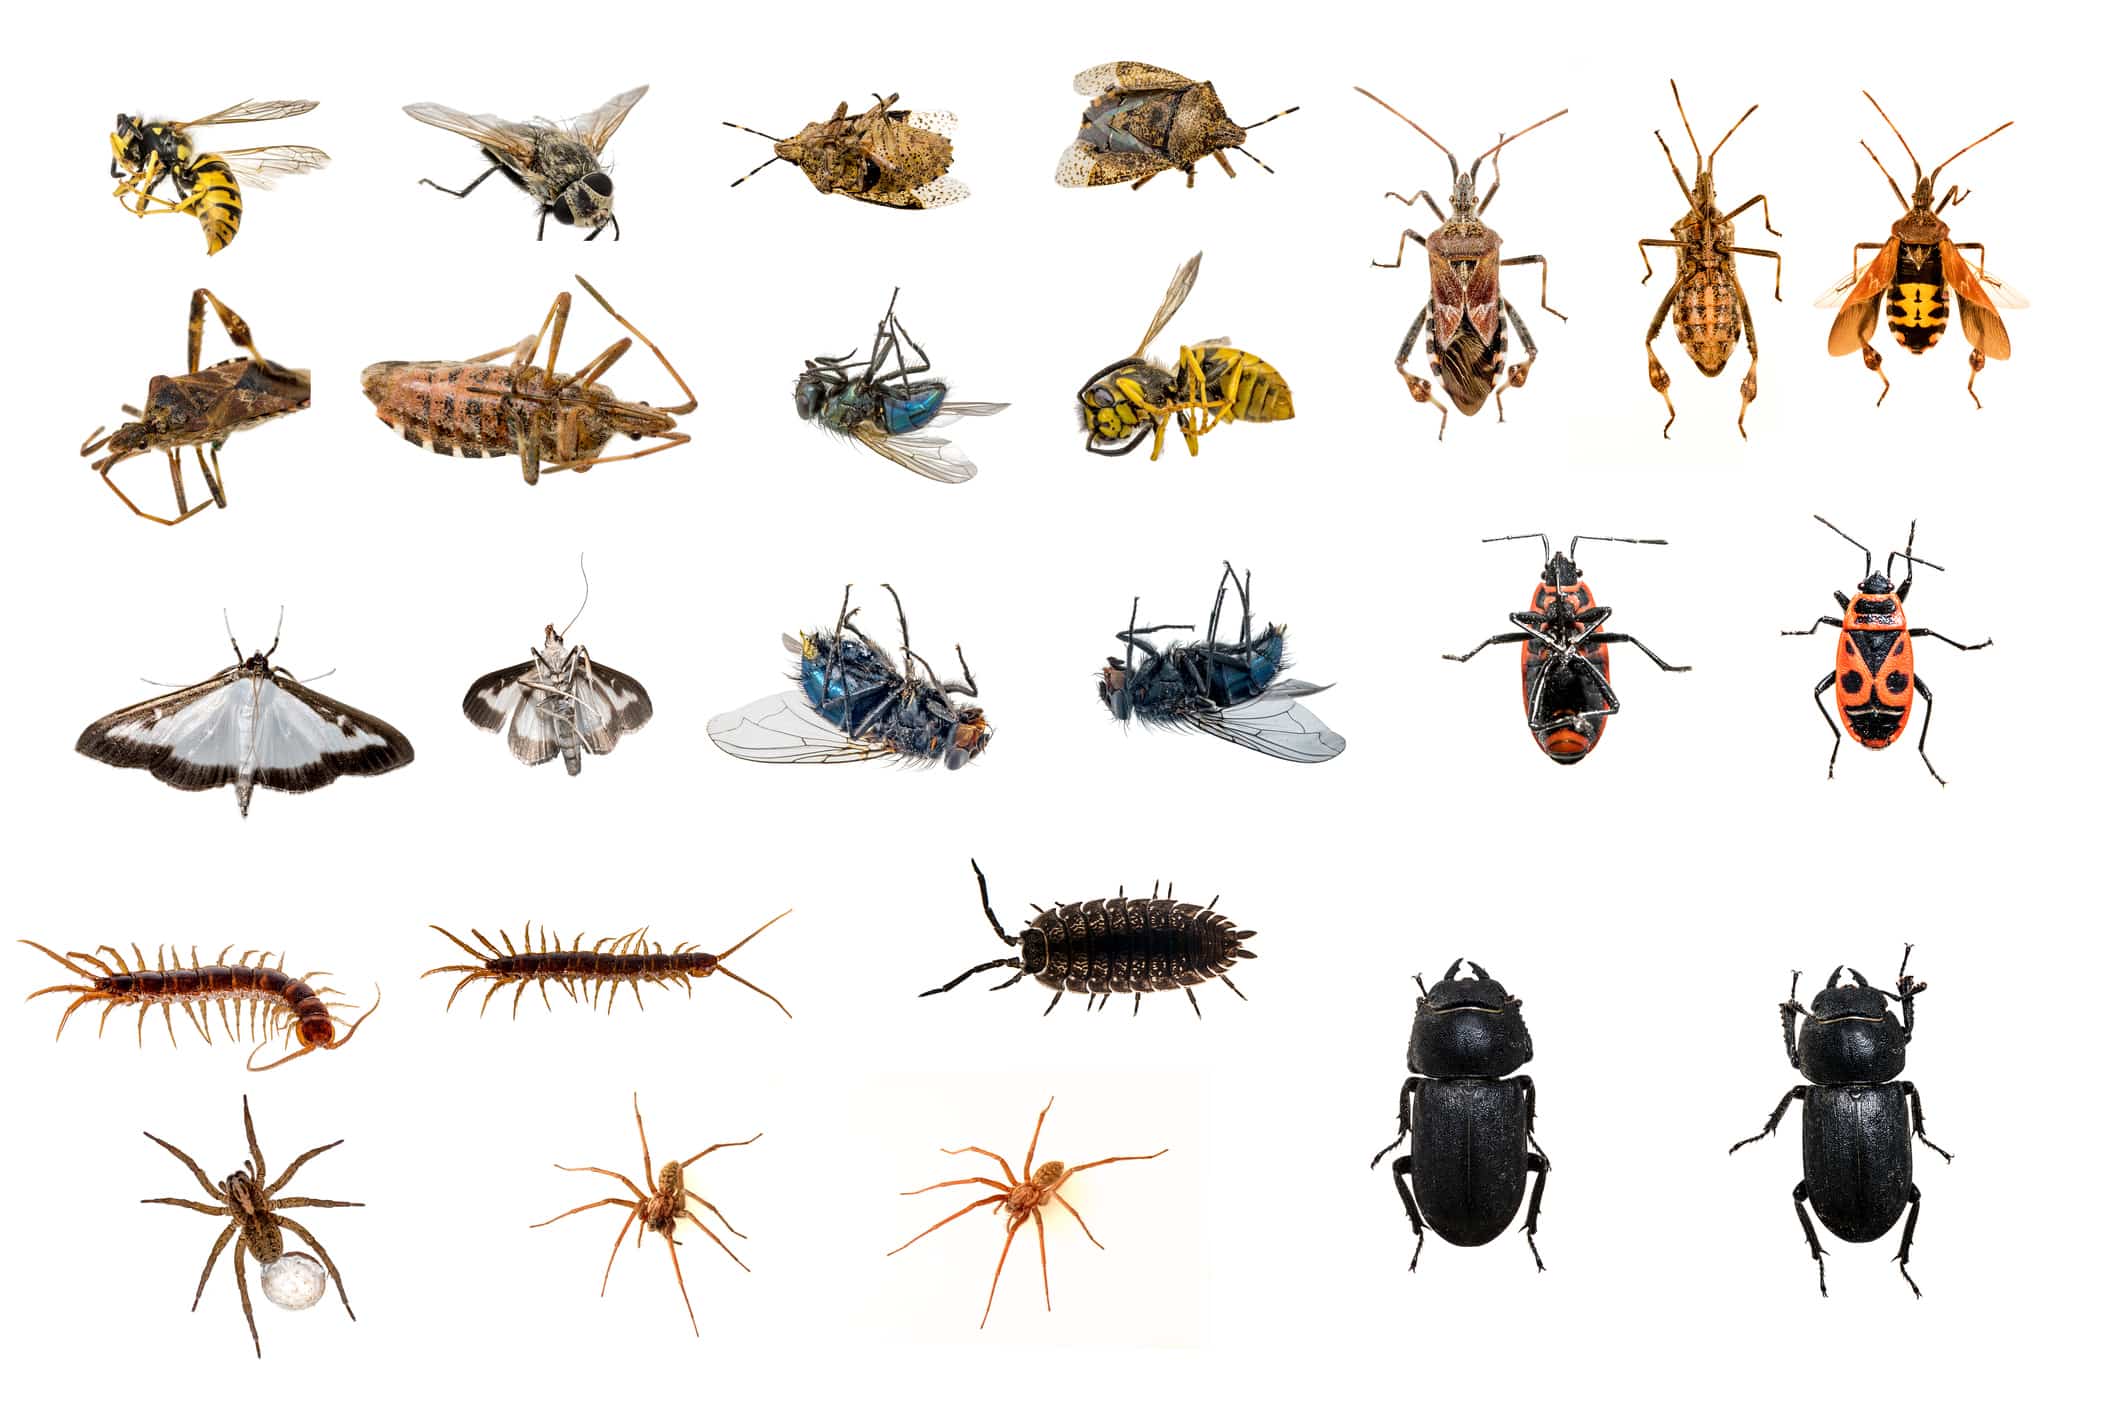 A Comprehensive List of House Pests in Southwest Washington